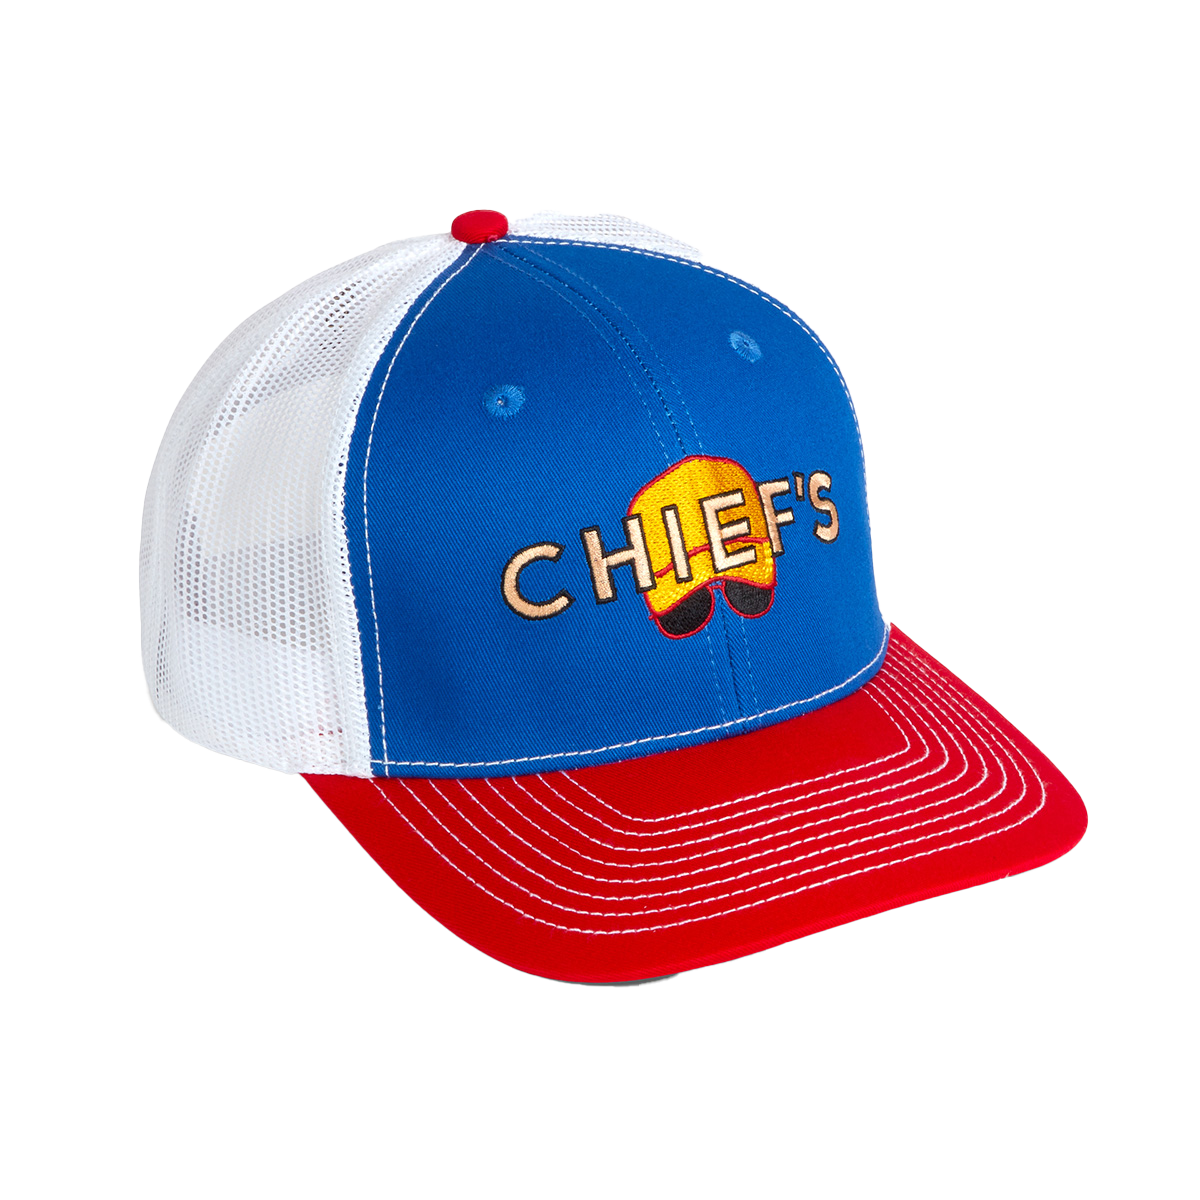 Chief's Marquee Hat - Red, White & Blue